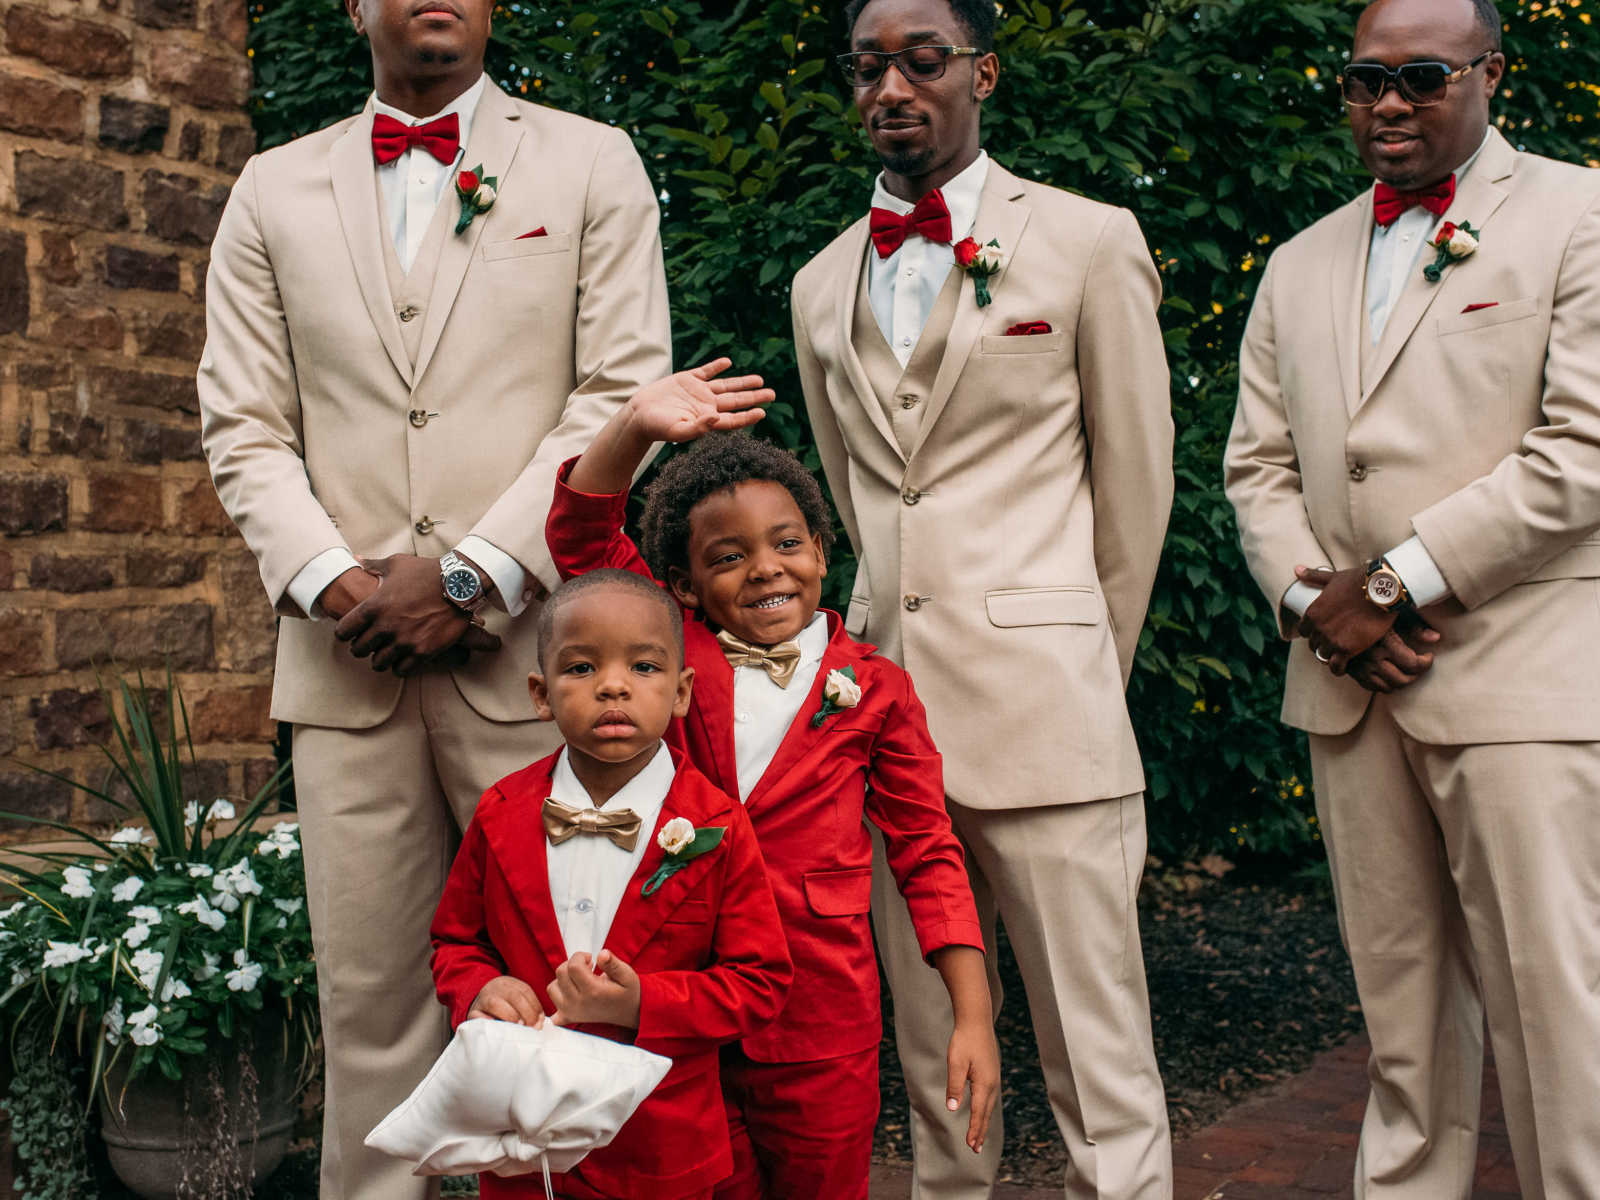 Little boy smiling and waving as he stands next to younger brother and groomsmen at mothers wedding